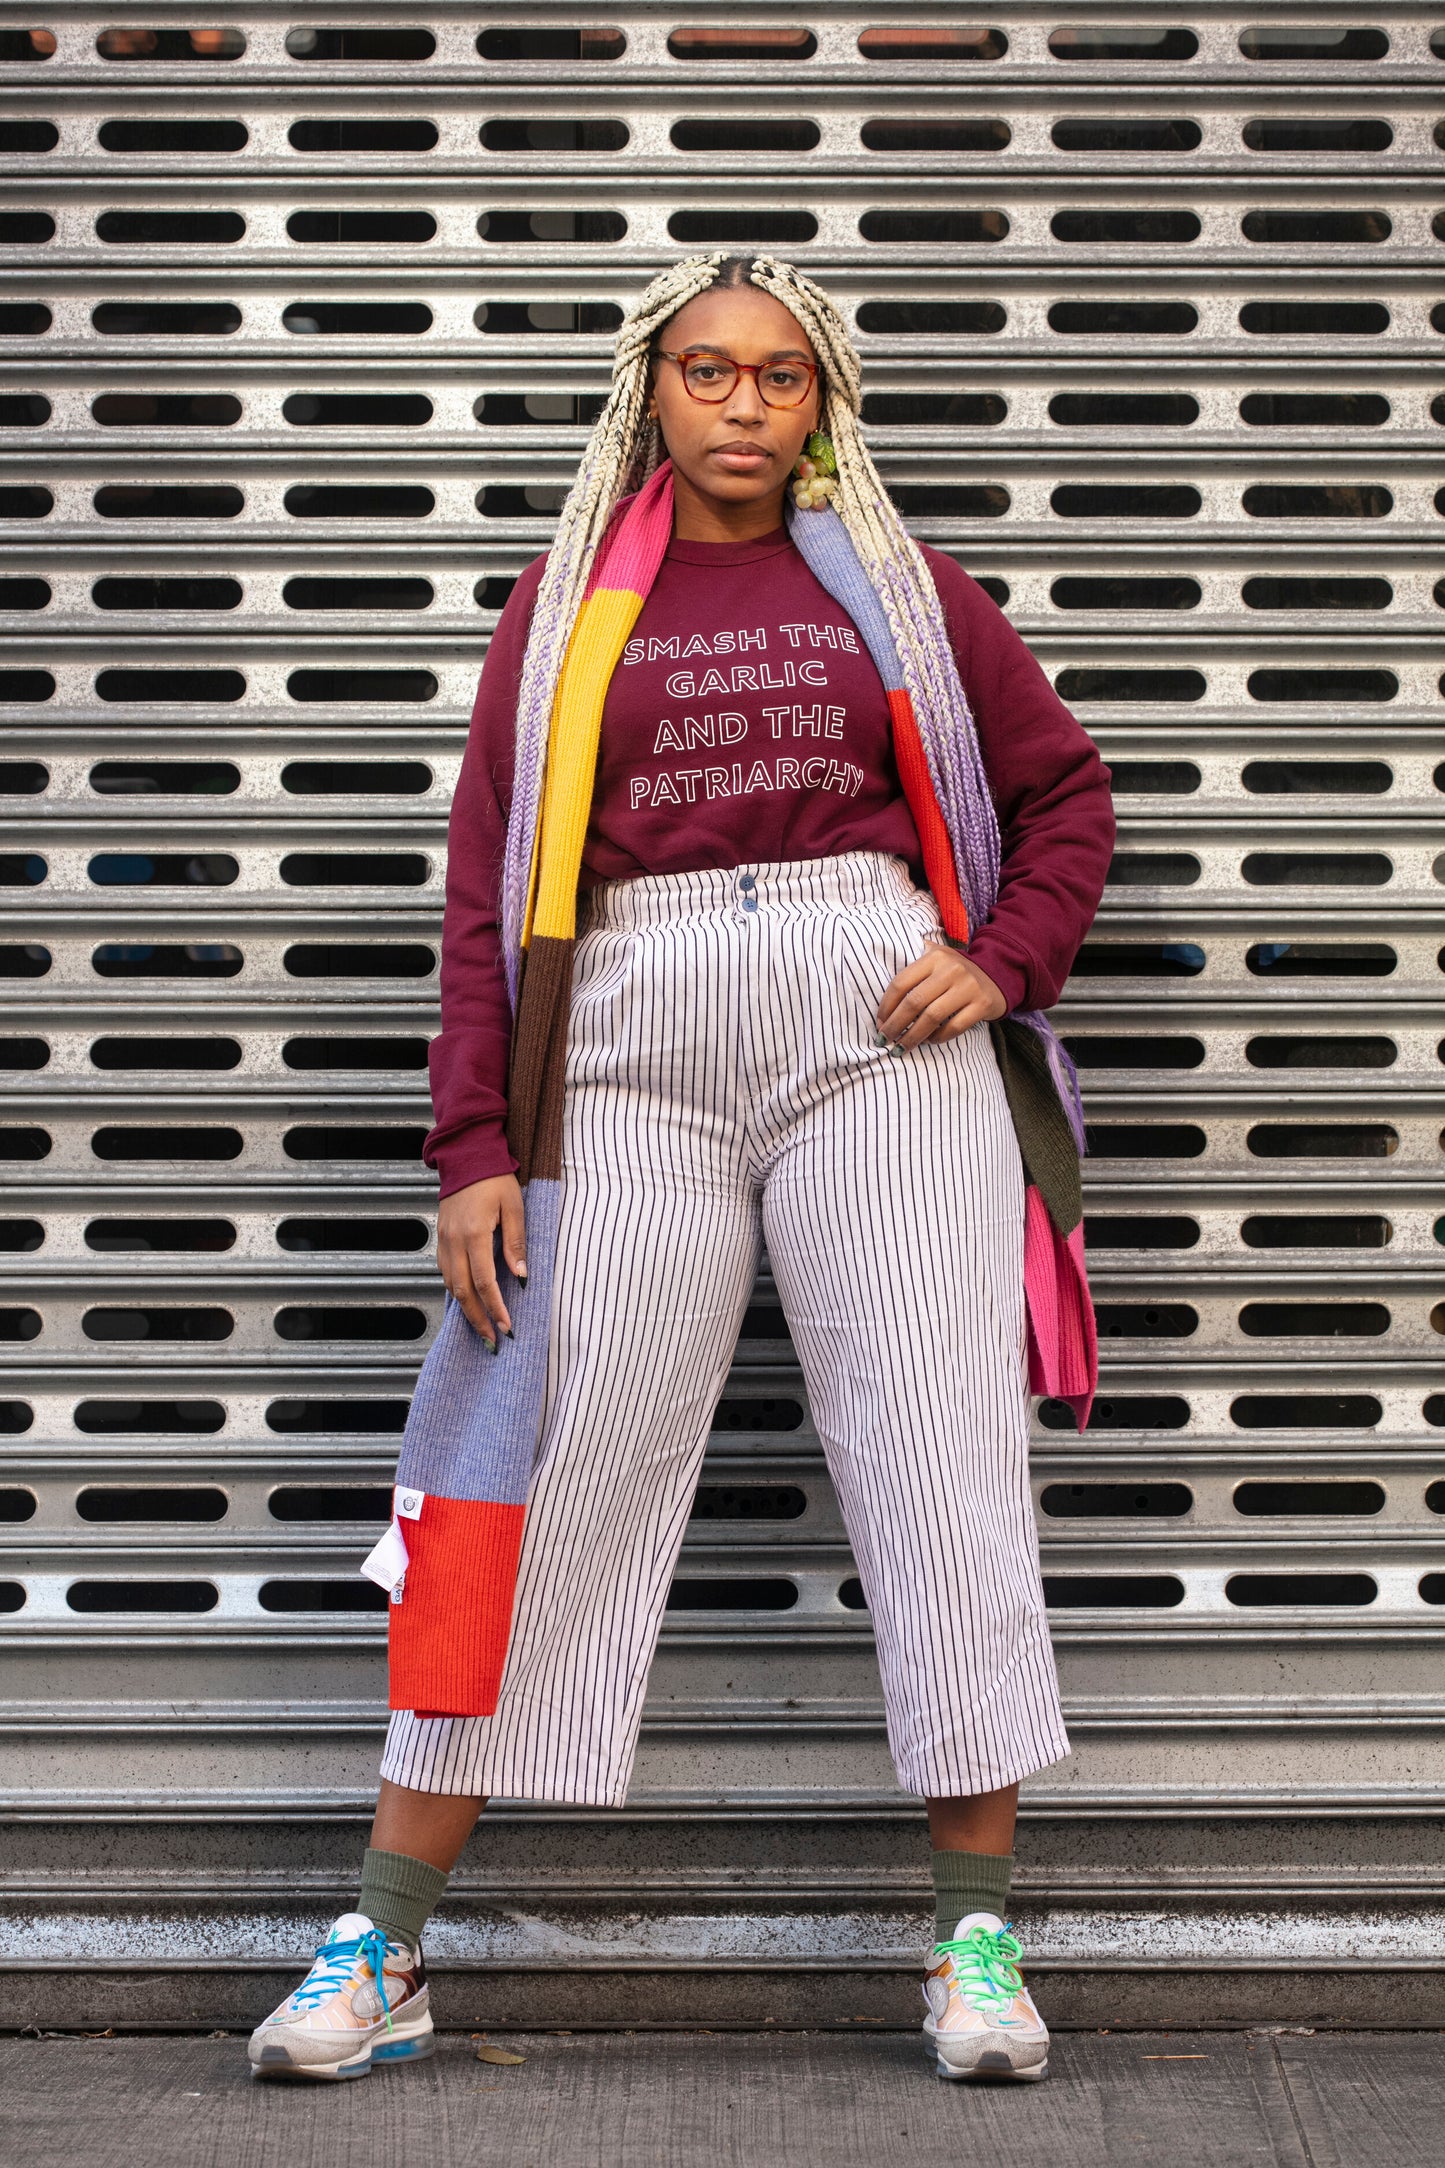 A woman wears a maroon "Smash the Garlic and the Patriarchy" crewneck with a colorful scarf and white striped pants